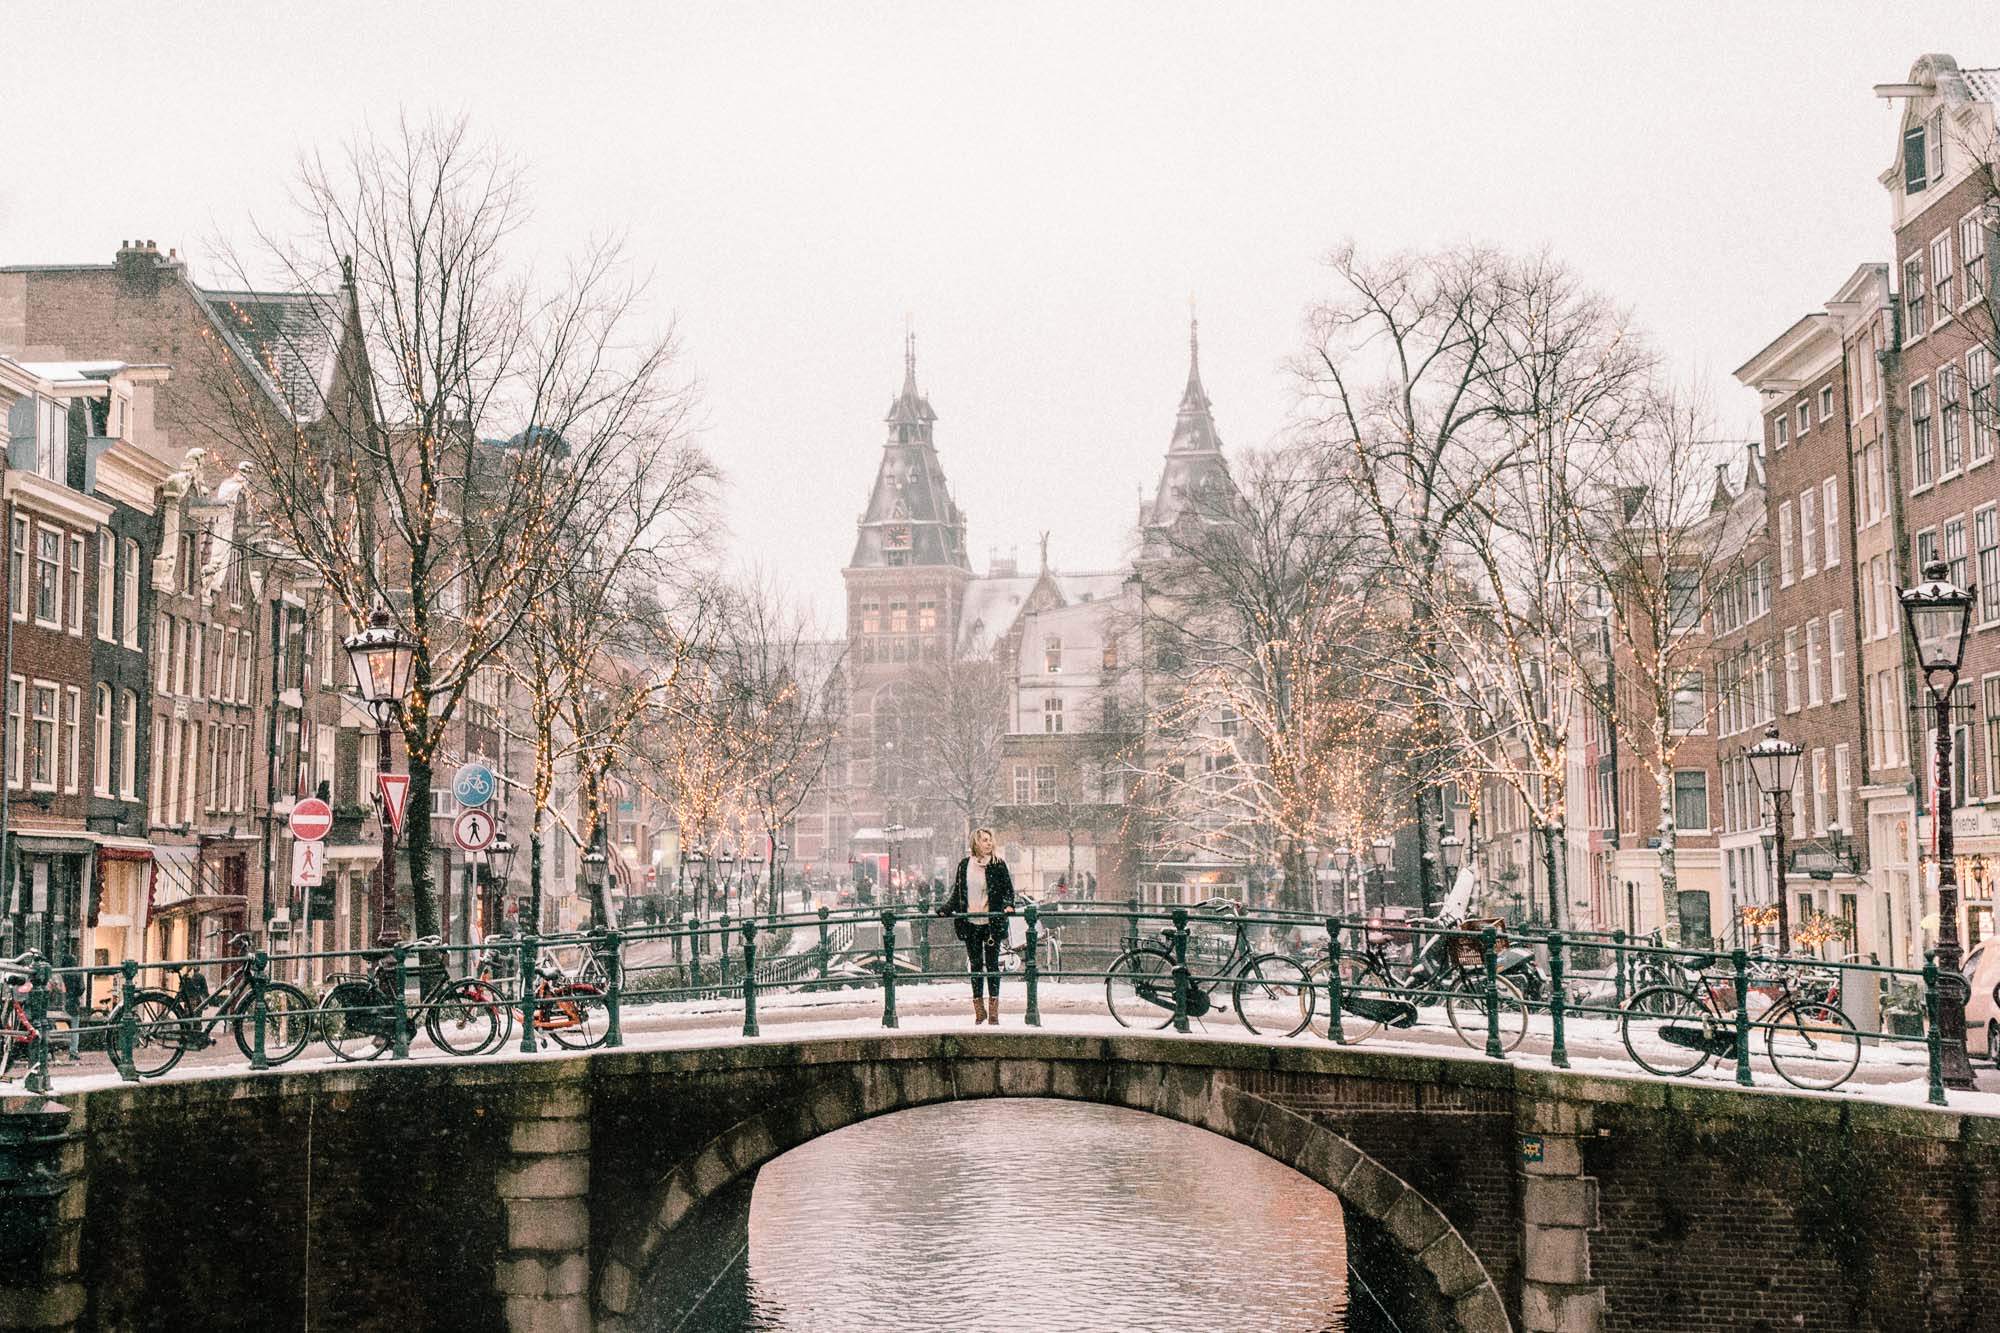 Selena Taylor Travel Blogger behind Find Us Lost in Amsterdam, The Netherlands